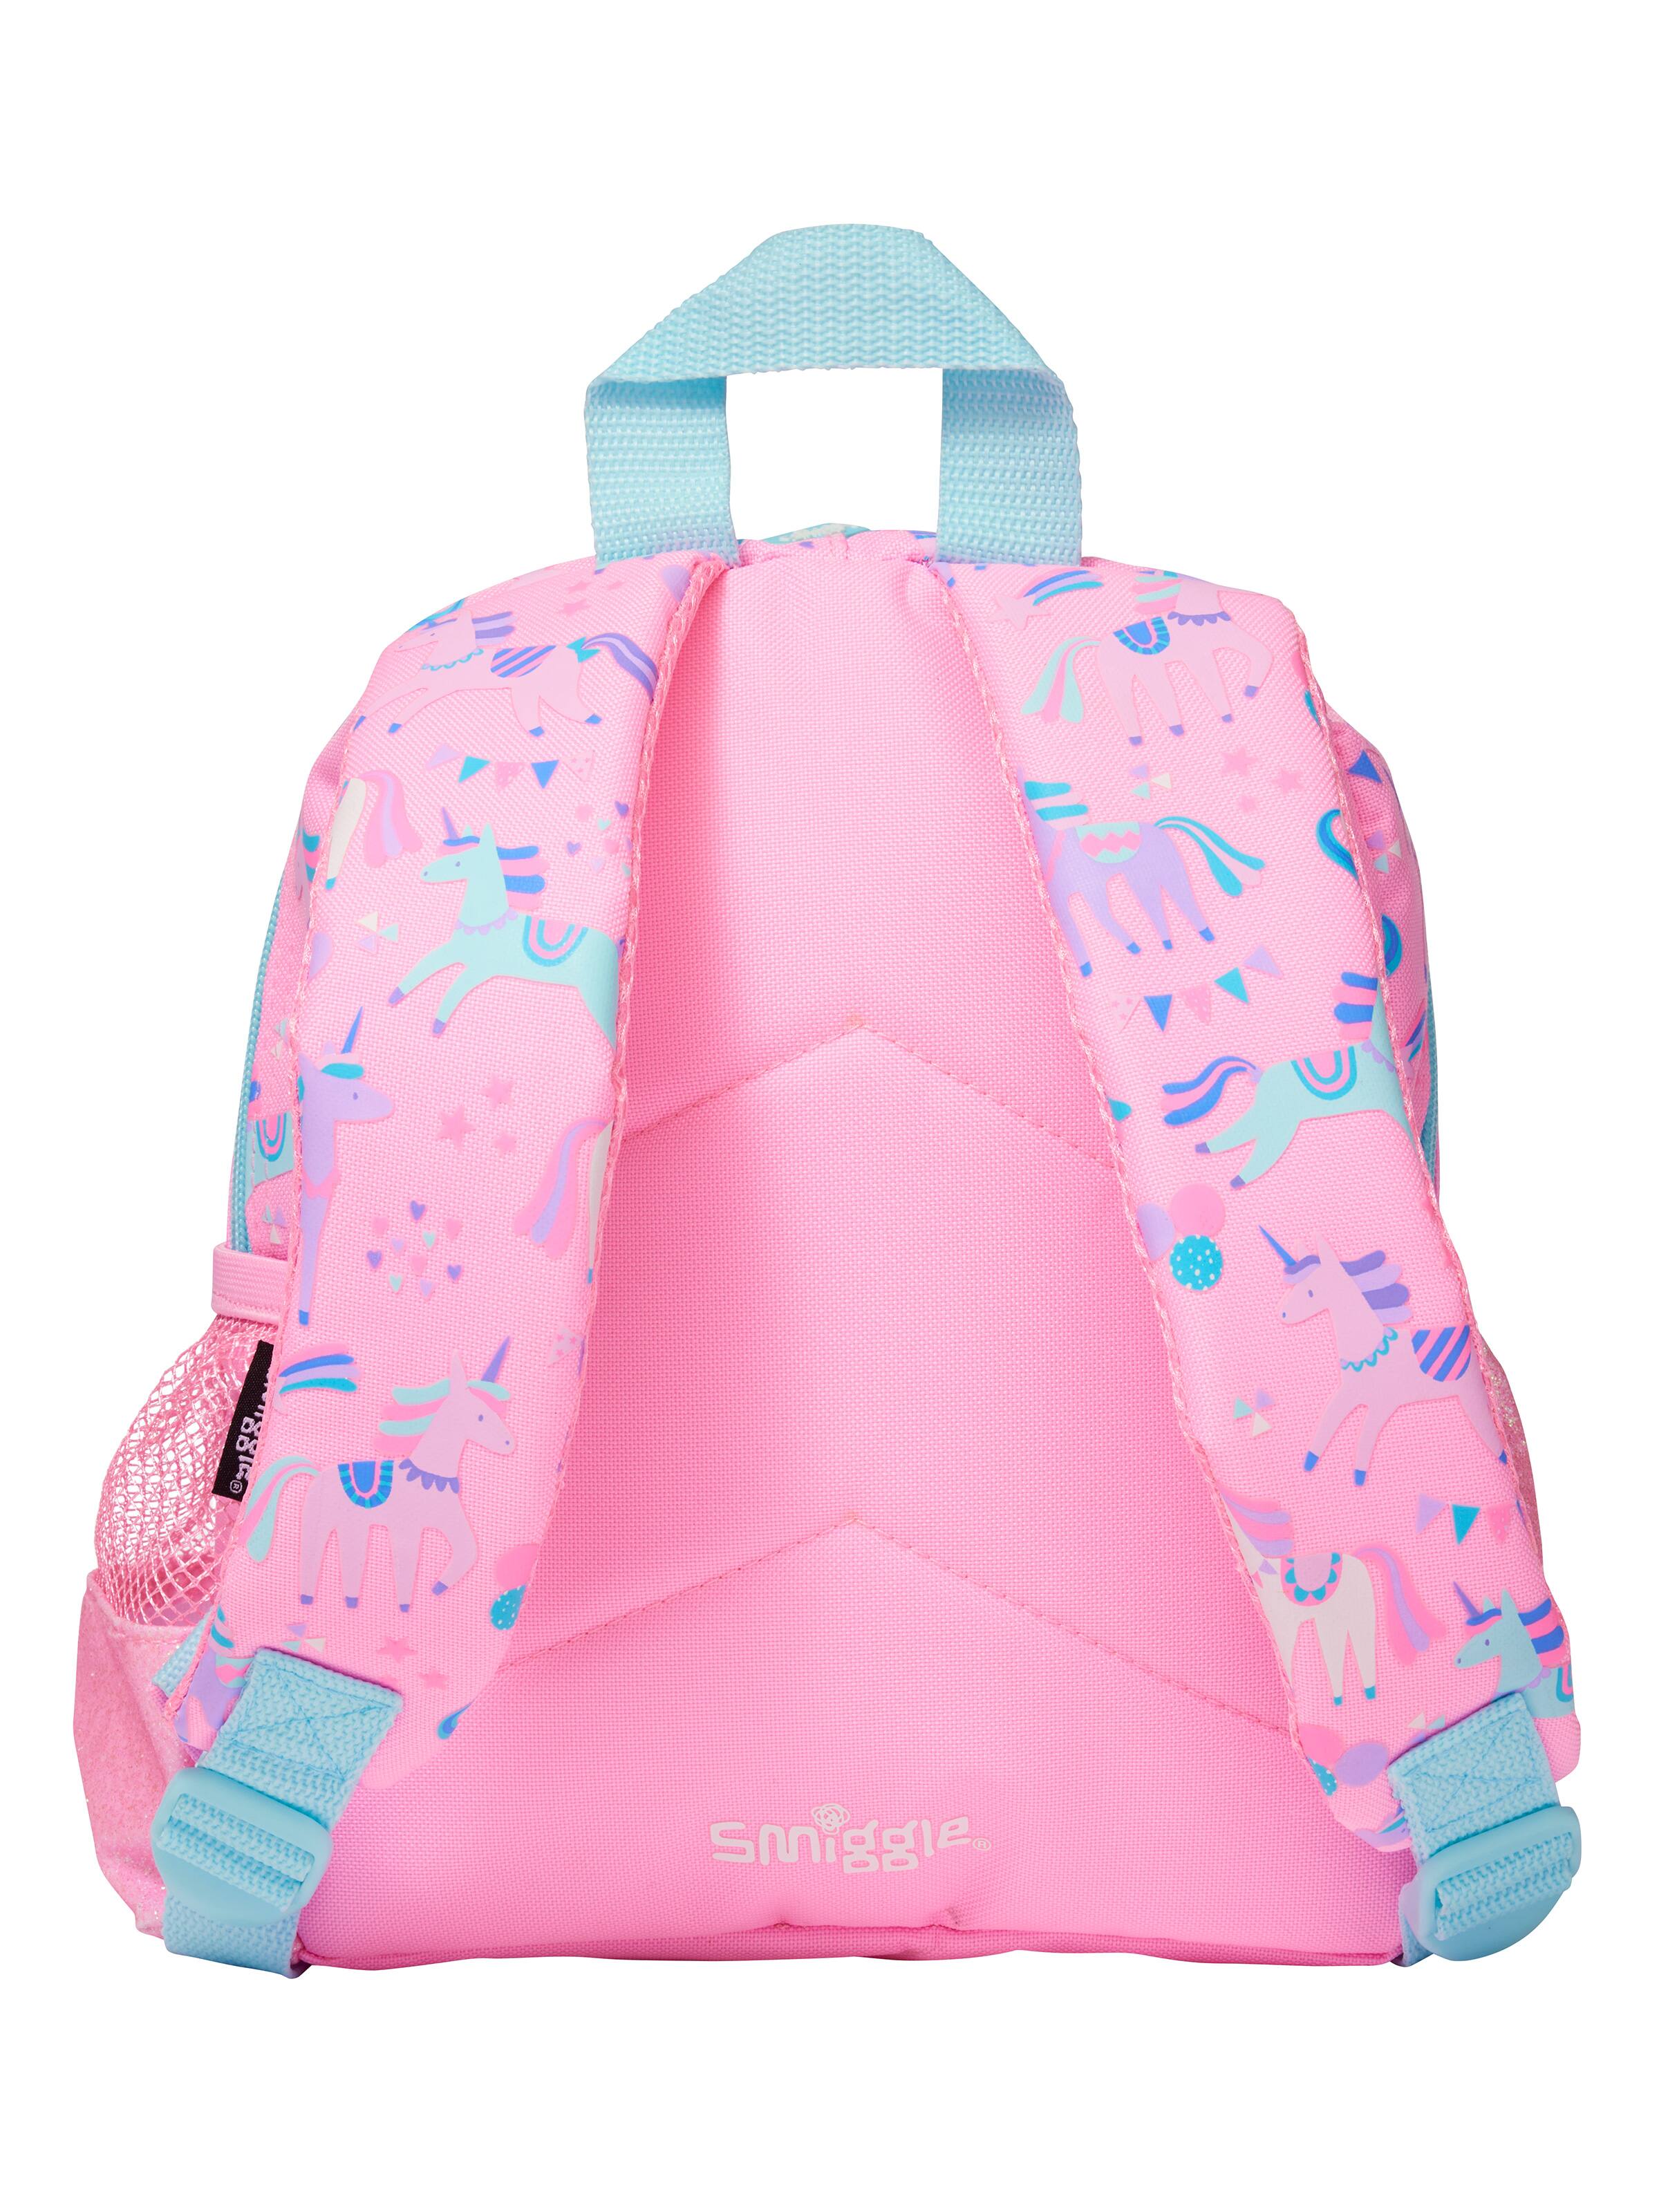 Smiggle - Shop our Neon backpacks fit for every occasion 😍 Need a new  school backpack? Give the Neon Classic Backpack a whirl! Need a backpack  for day trips or overnight stays?